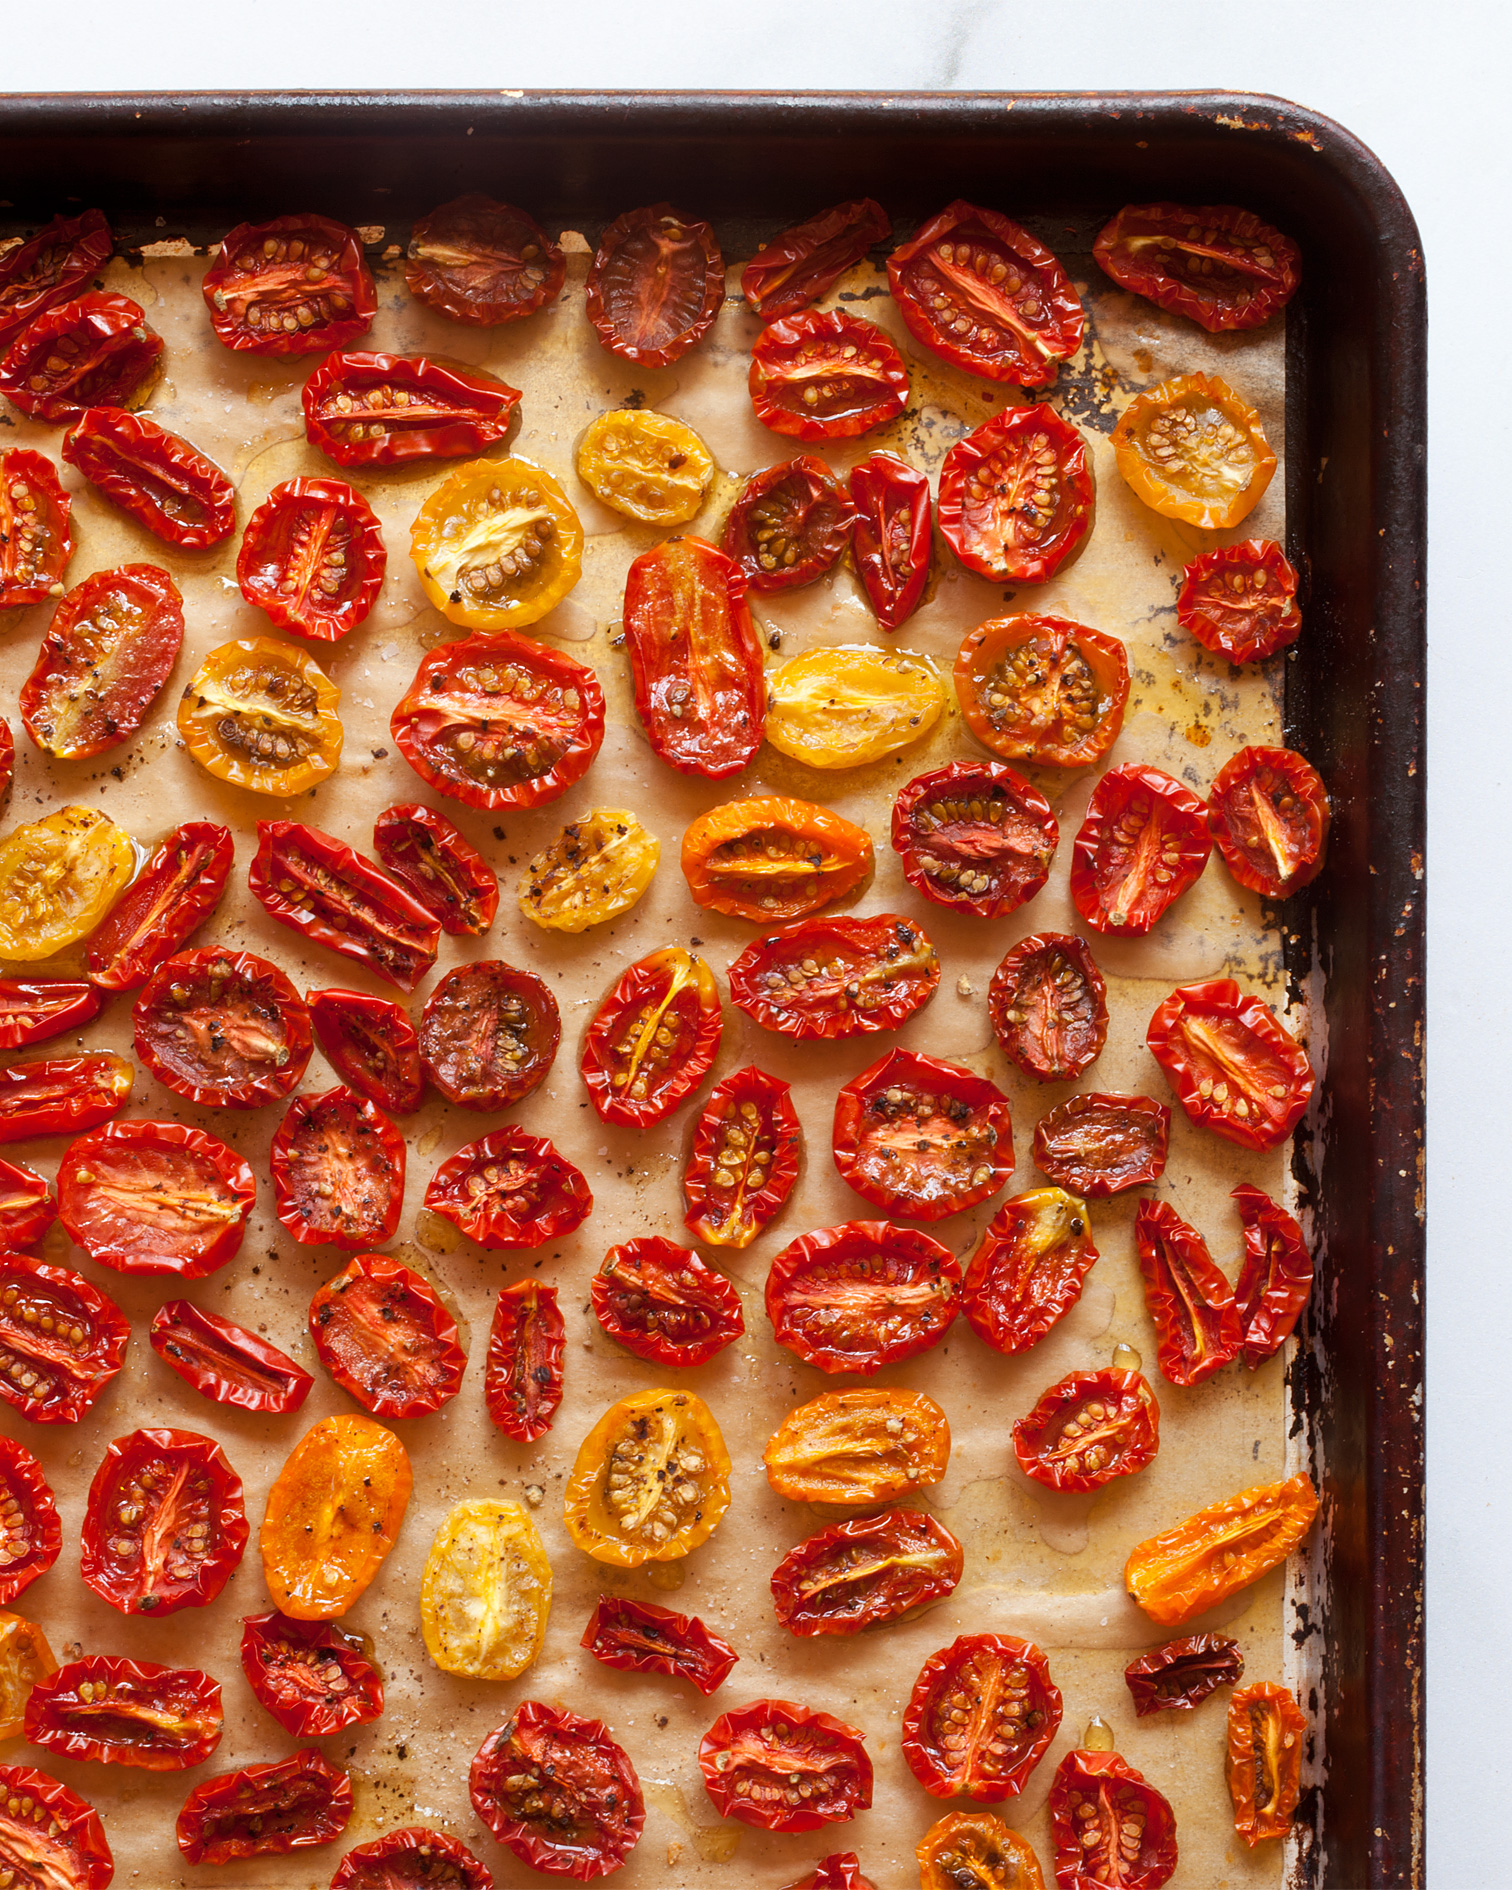 Slow-roasted tomatoes on a sheet pan.